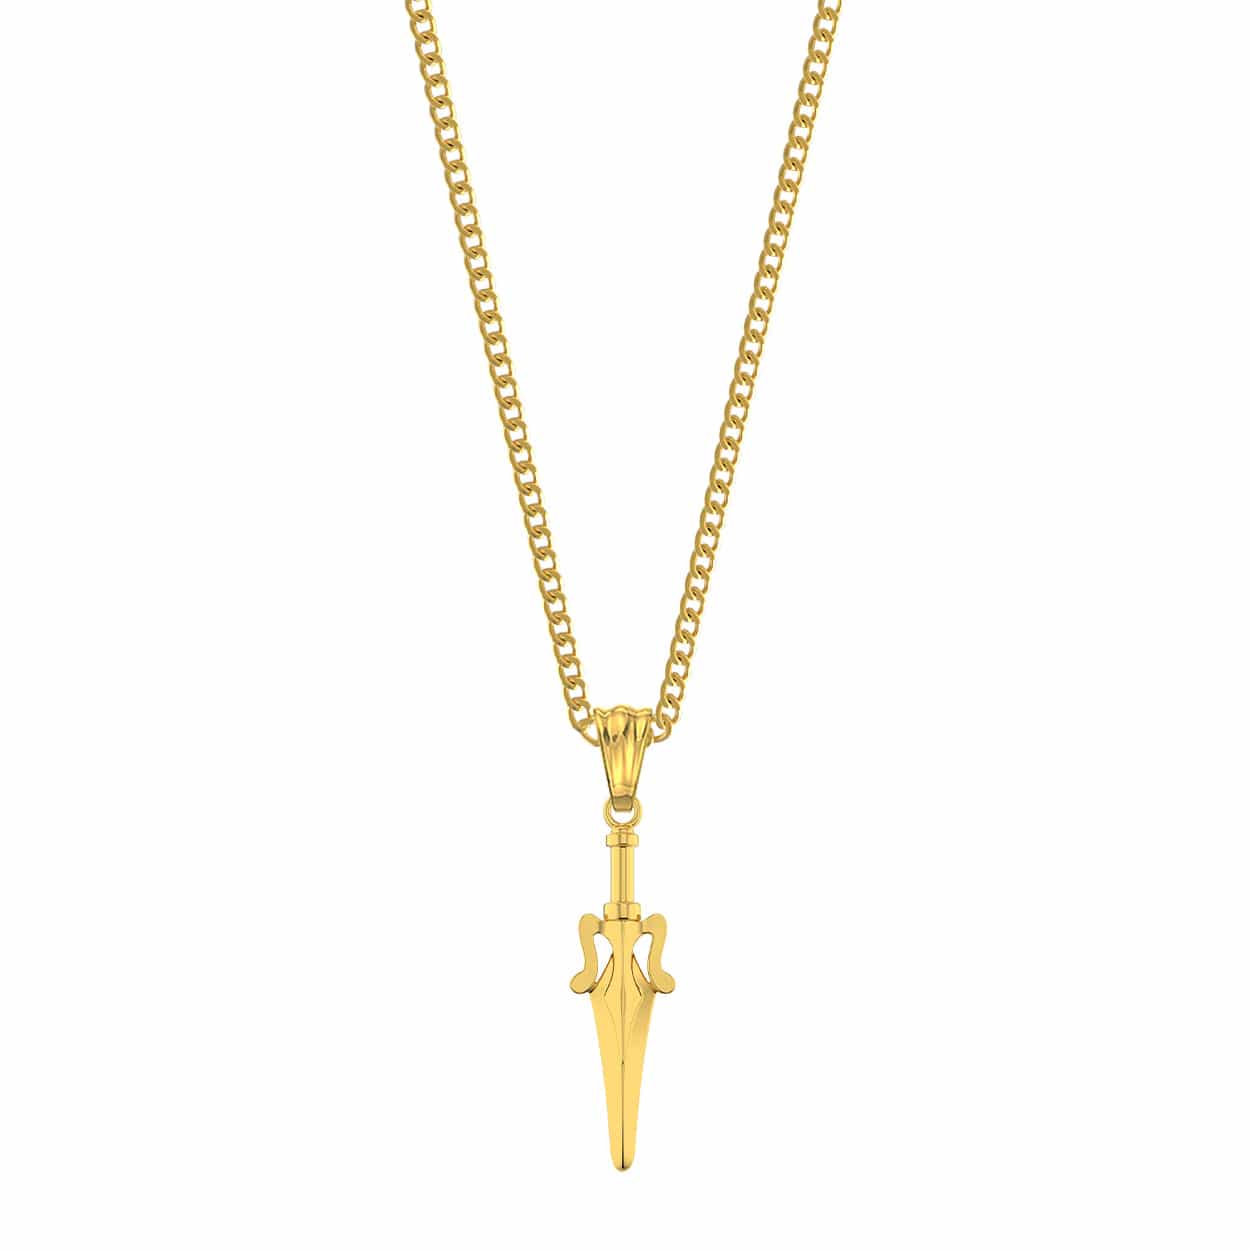 Mister Power Sword Necklace